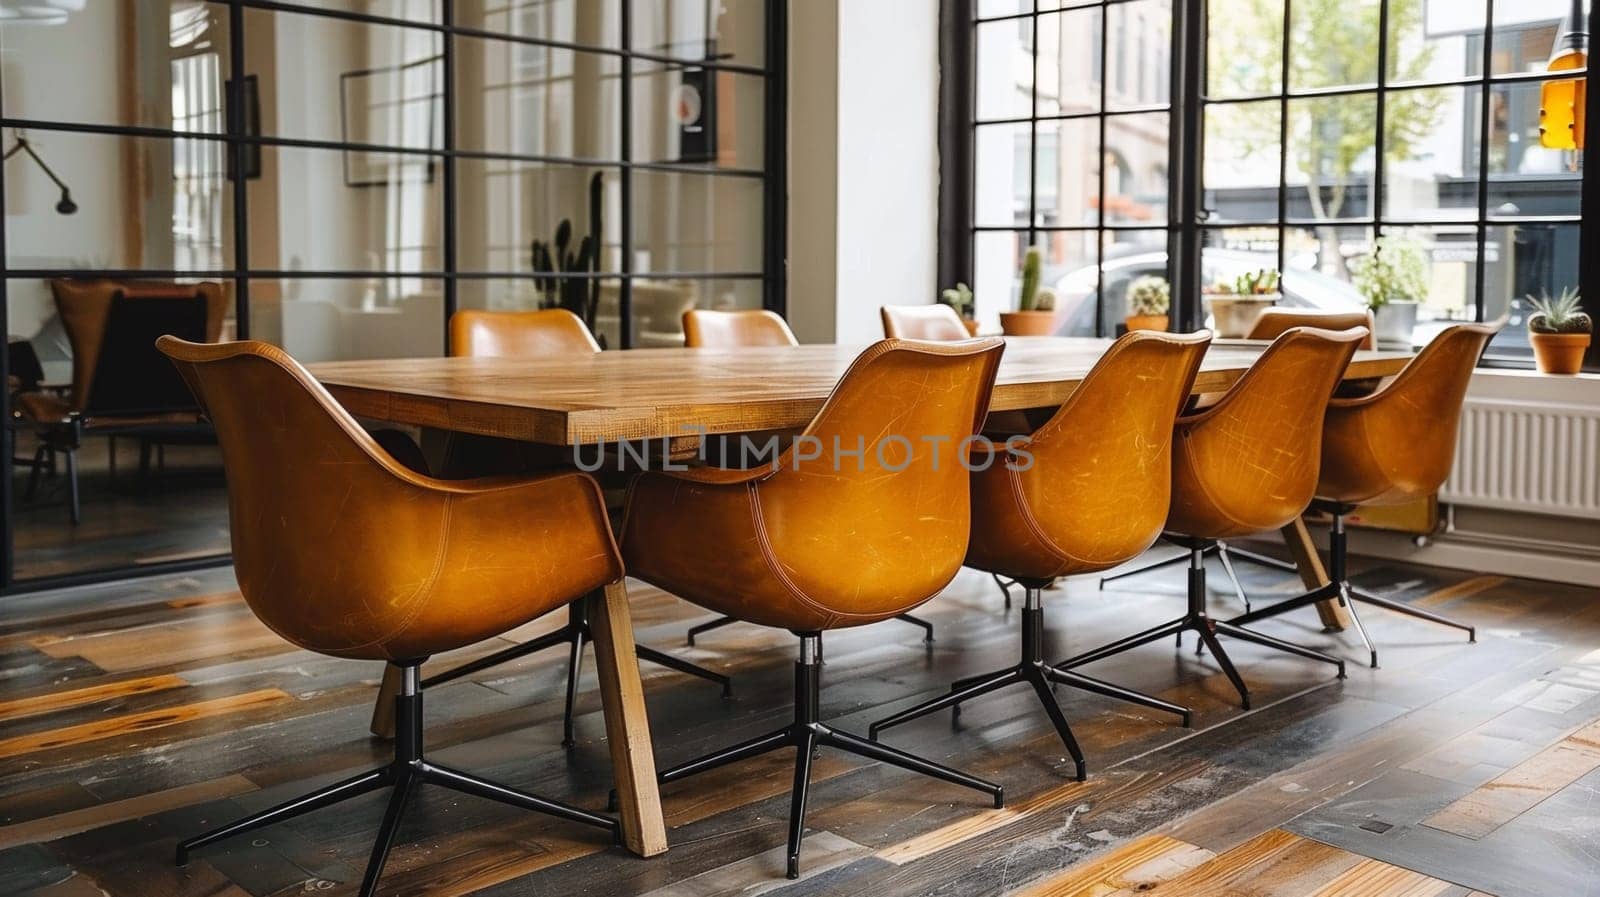 A wooden table with orange chairs in front of a window, AI by starush